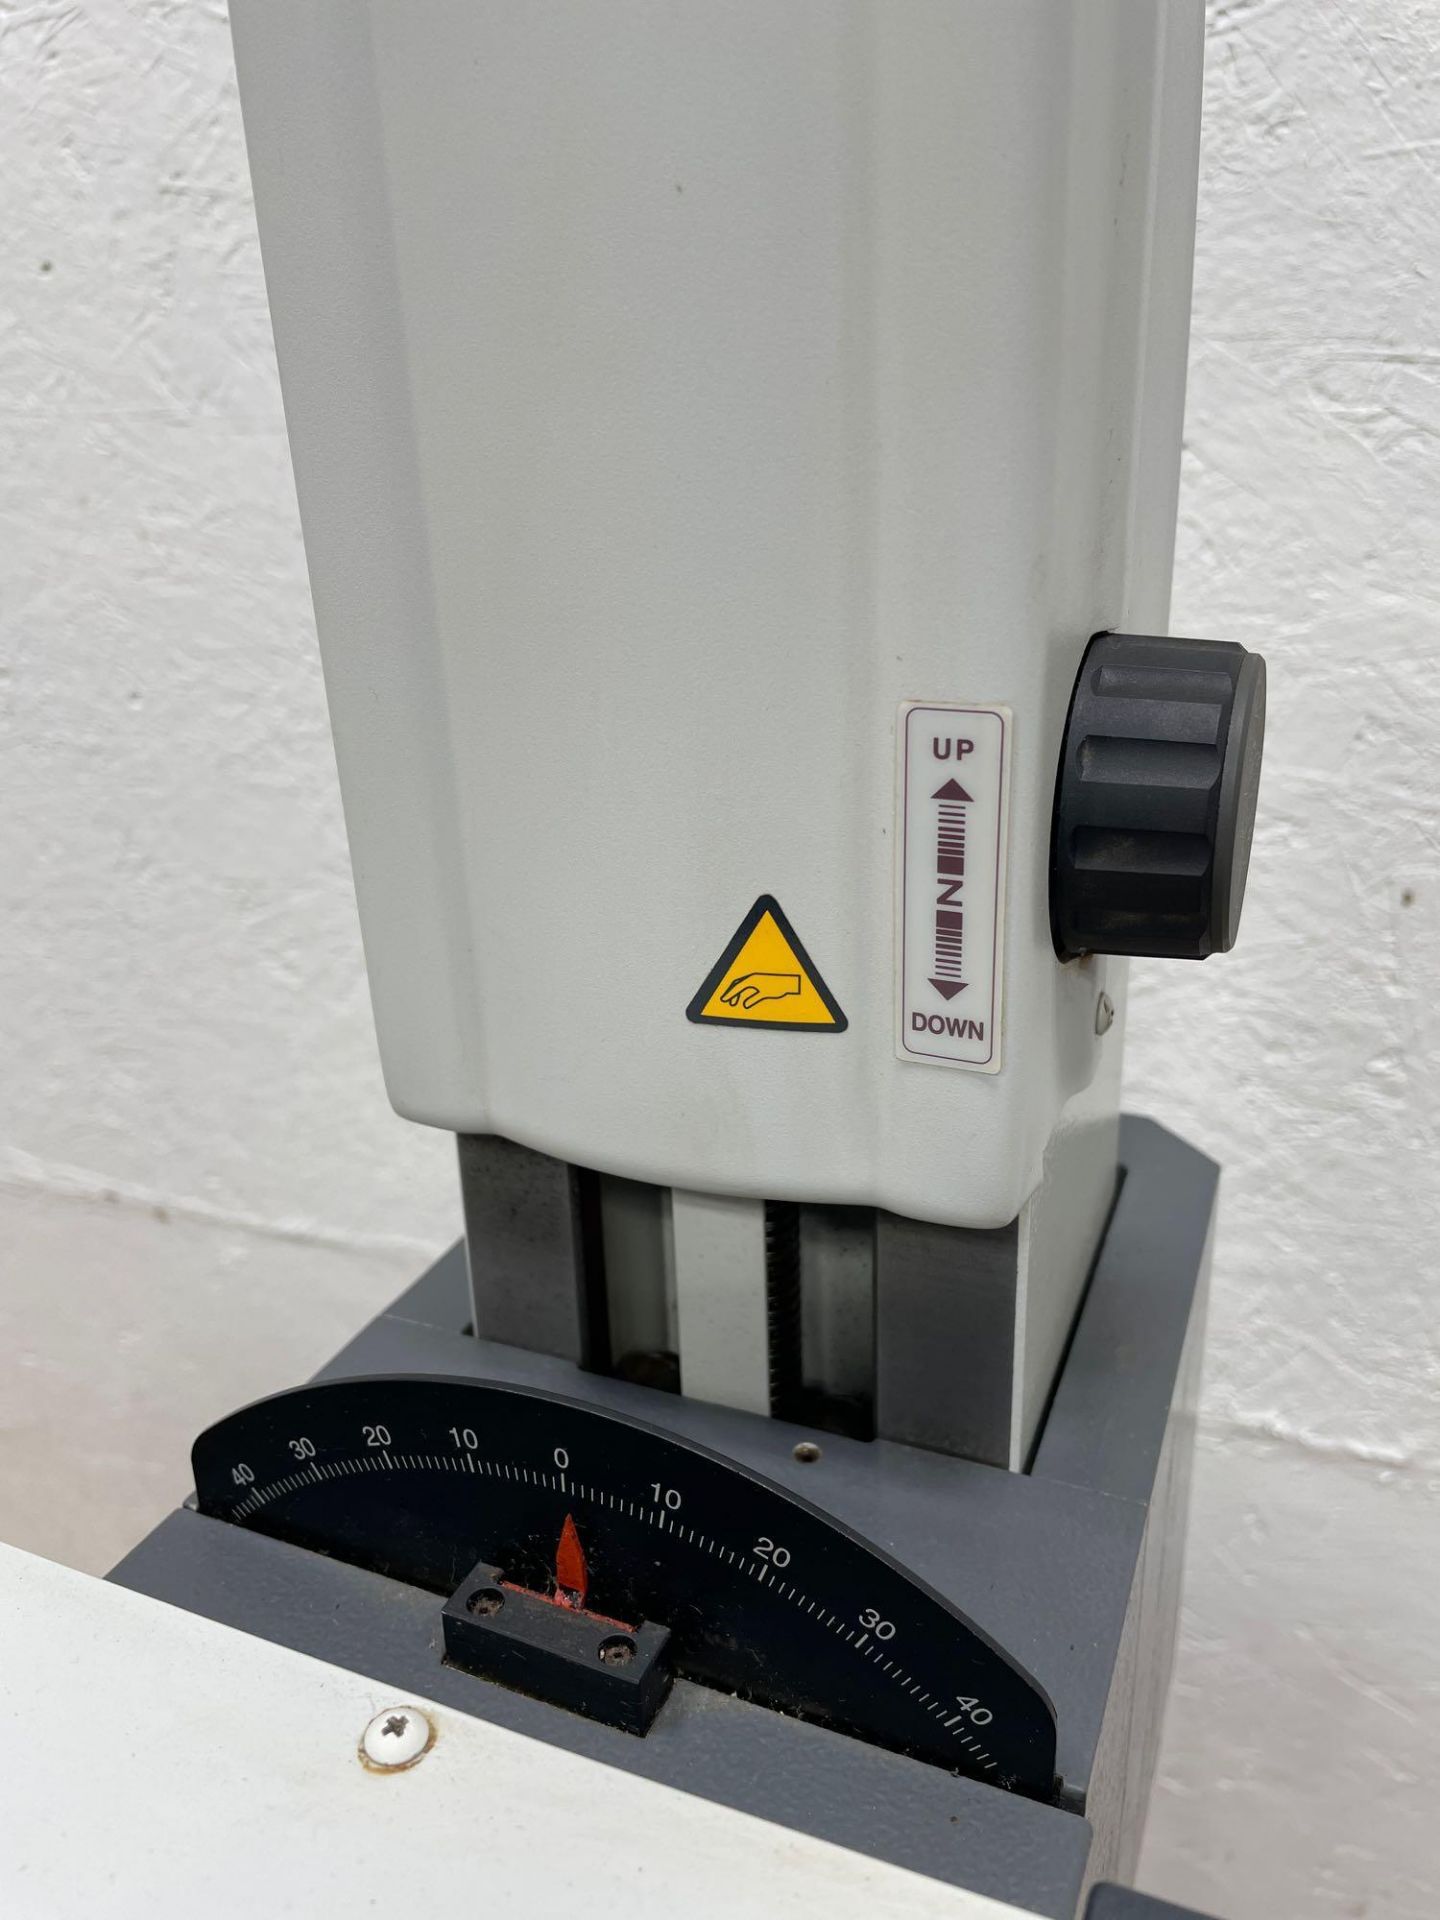 MITUTOYO CS-3000 FORMTRACER Contour & Surface Roughness System Profilometer - Image 17 of 20